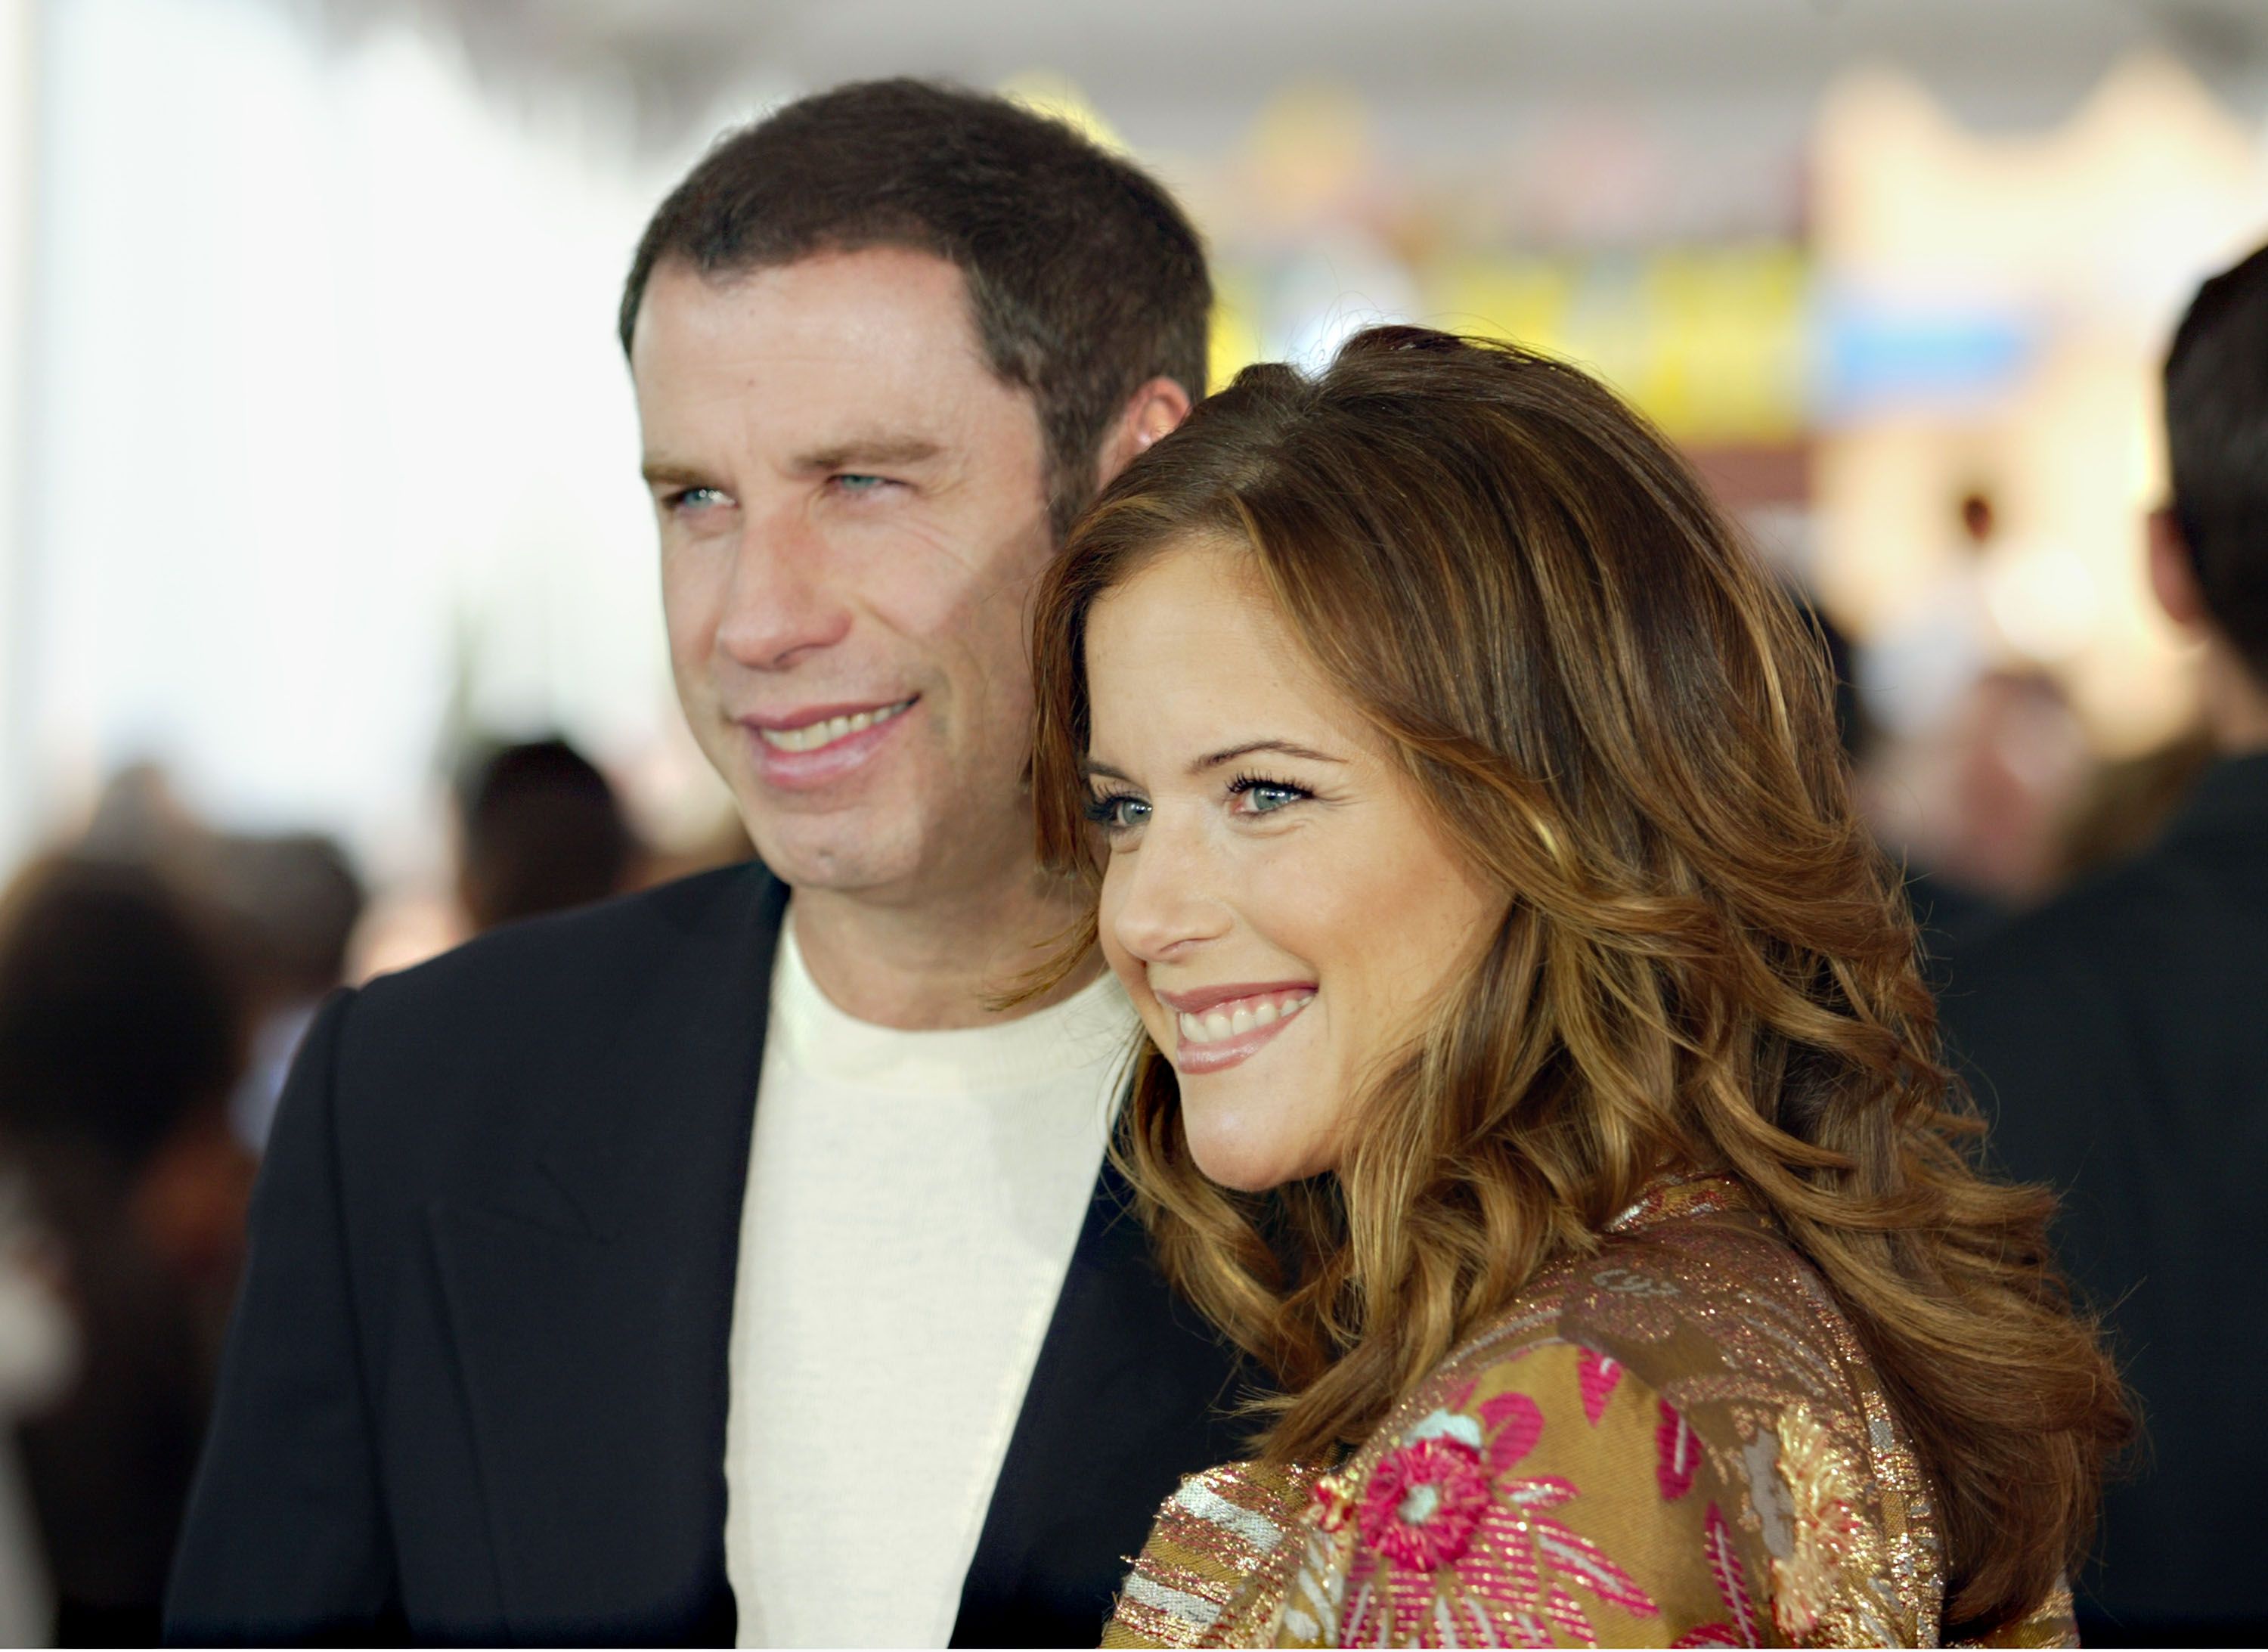 John Travolta and late wife, Kelly Preston at the world premiere of "Dr. Seuss' The Cat in the Hat" at Universal Studios, November 8, 2003 in Hollywood, California | Photo: Getty Images